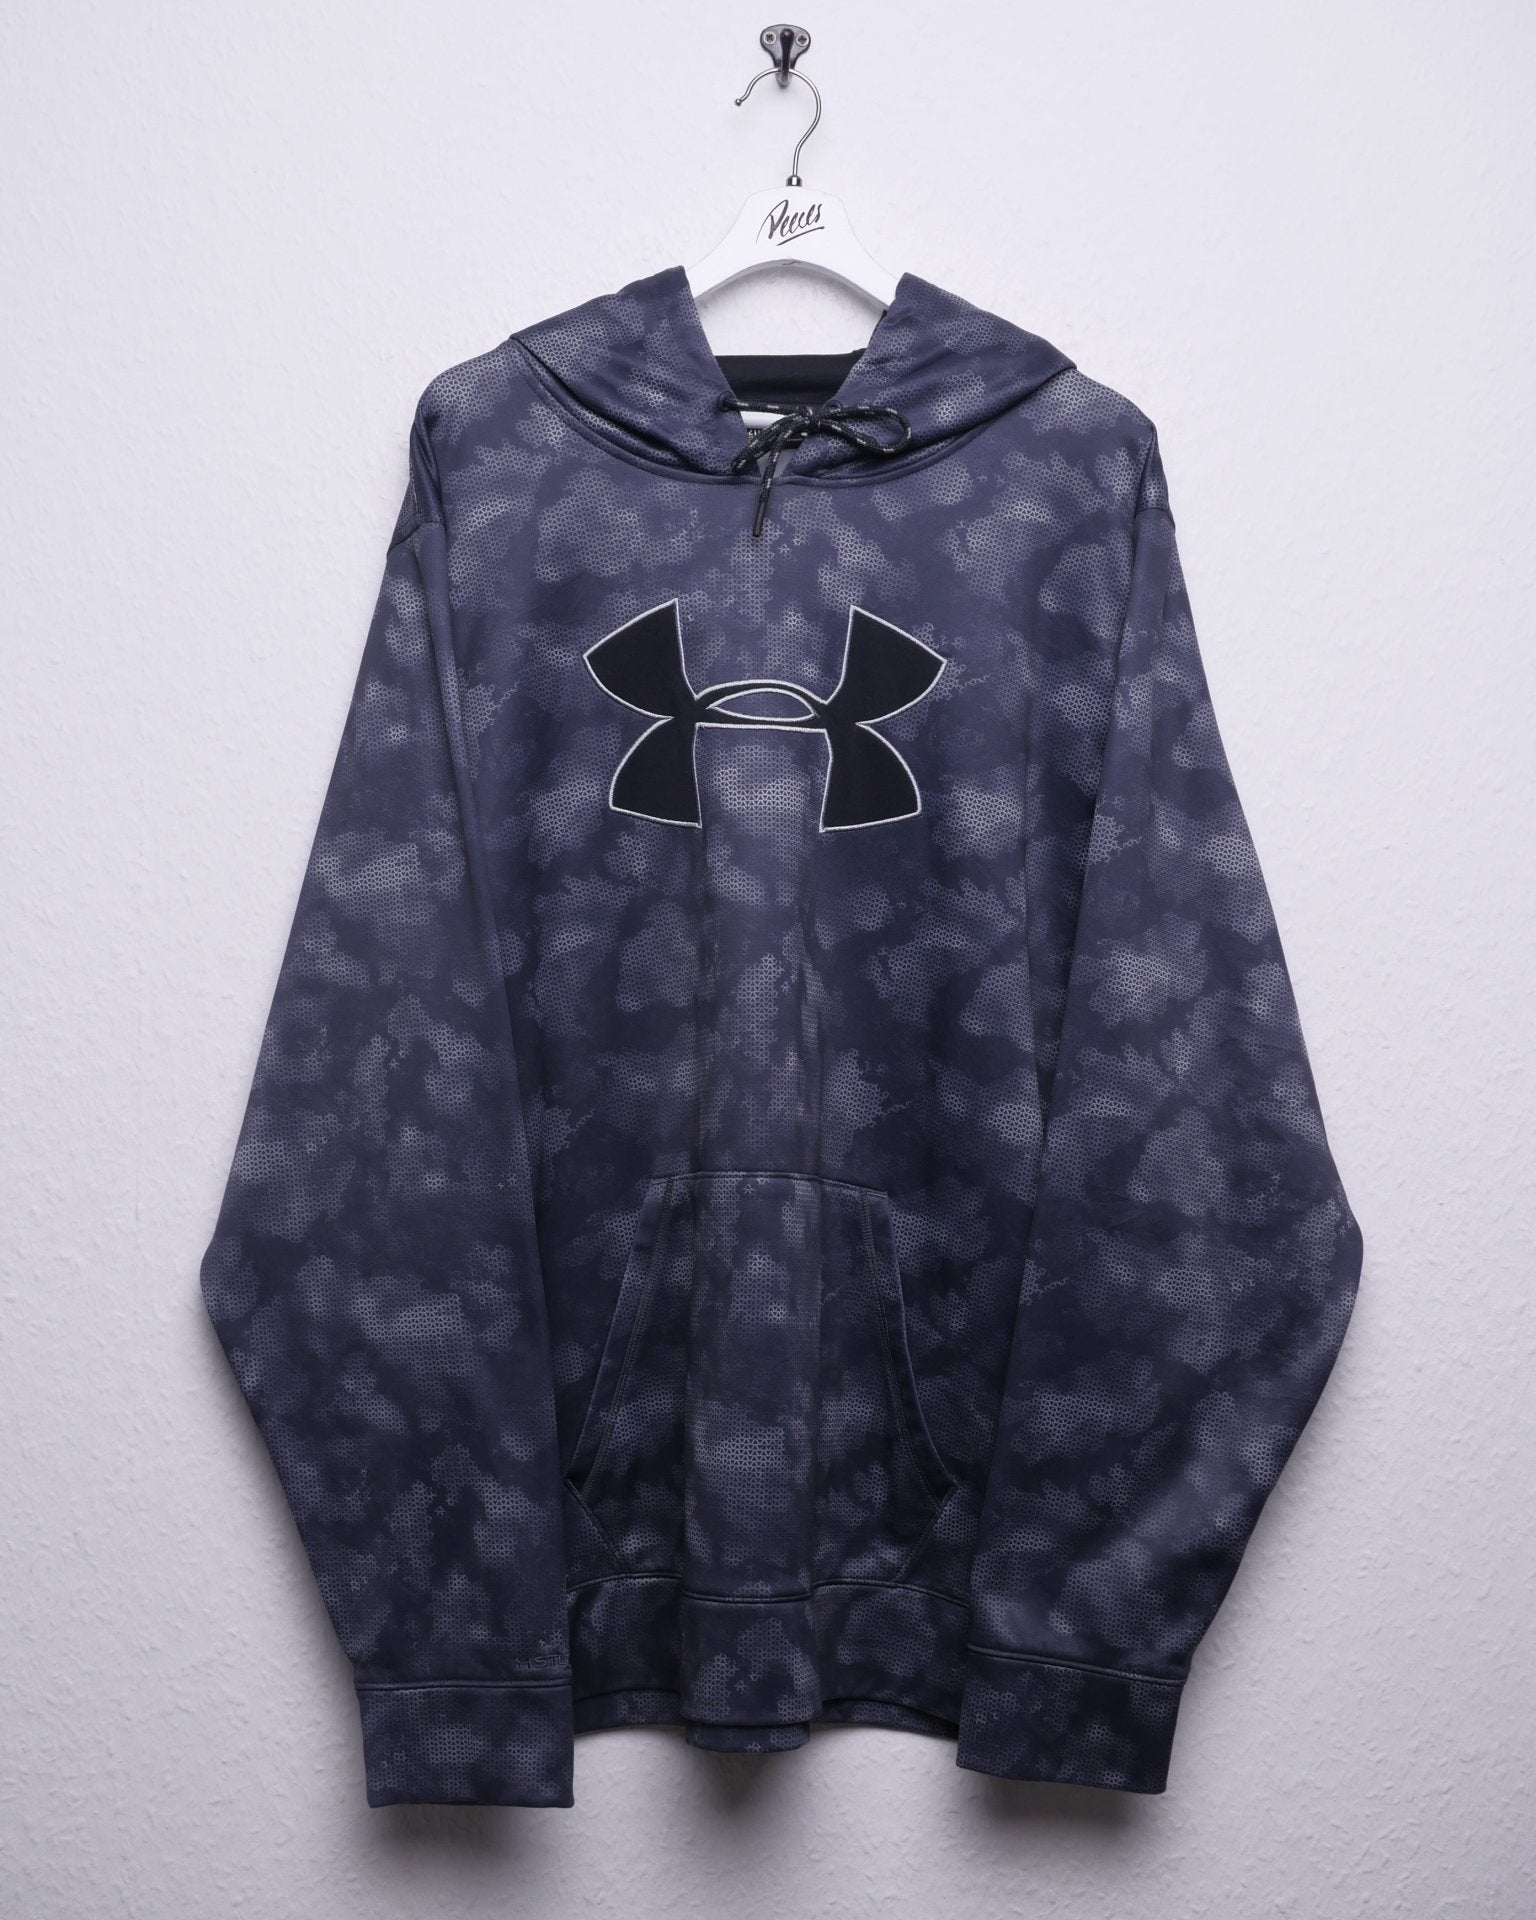 Under Amour embroidered Big Logo patterned Jersey Hoodie - Peeces